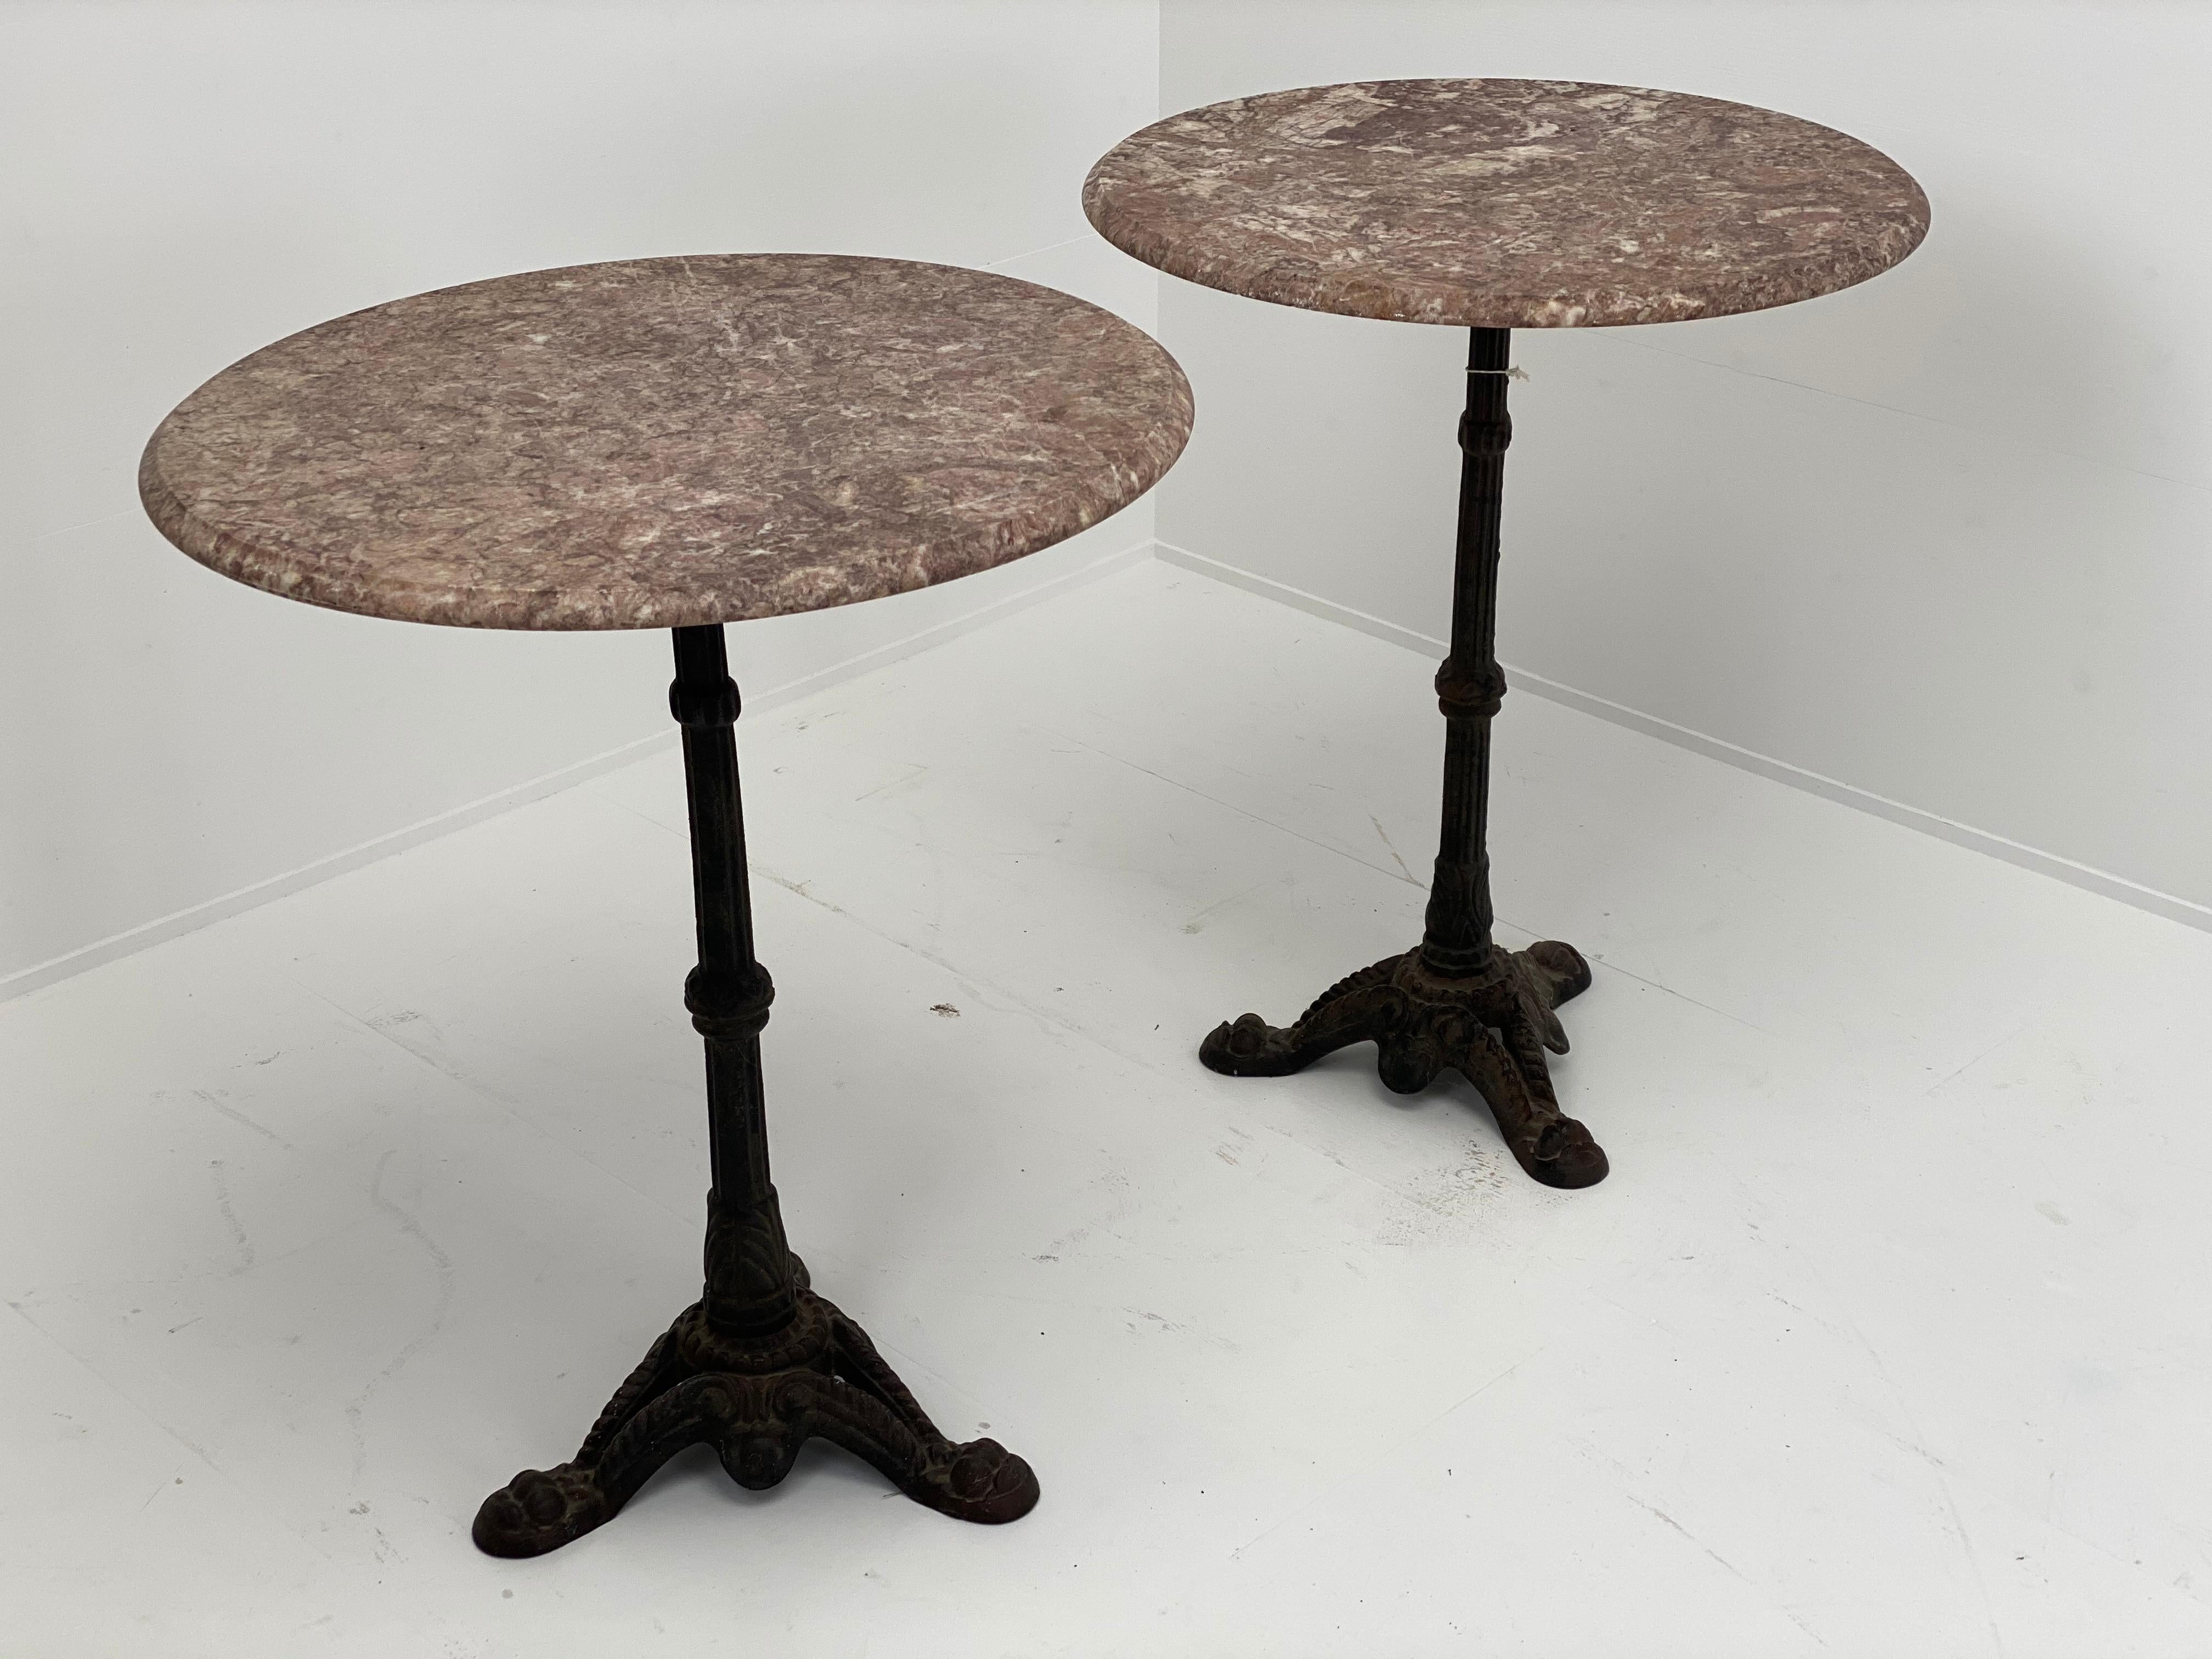 Beautiful pair of French bistro tables, France, circa 1960
great brown-red marble top with white veining on a central fluted pillar that rest on three legs,
gorgeous Patina and solid construction,
very decorative with multi-use in each